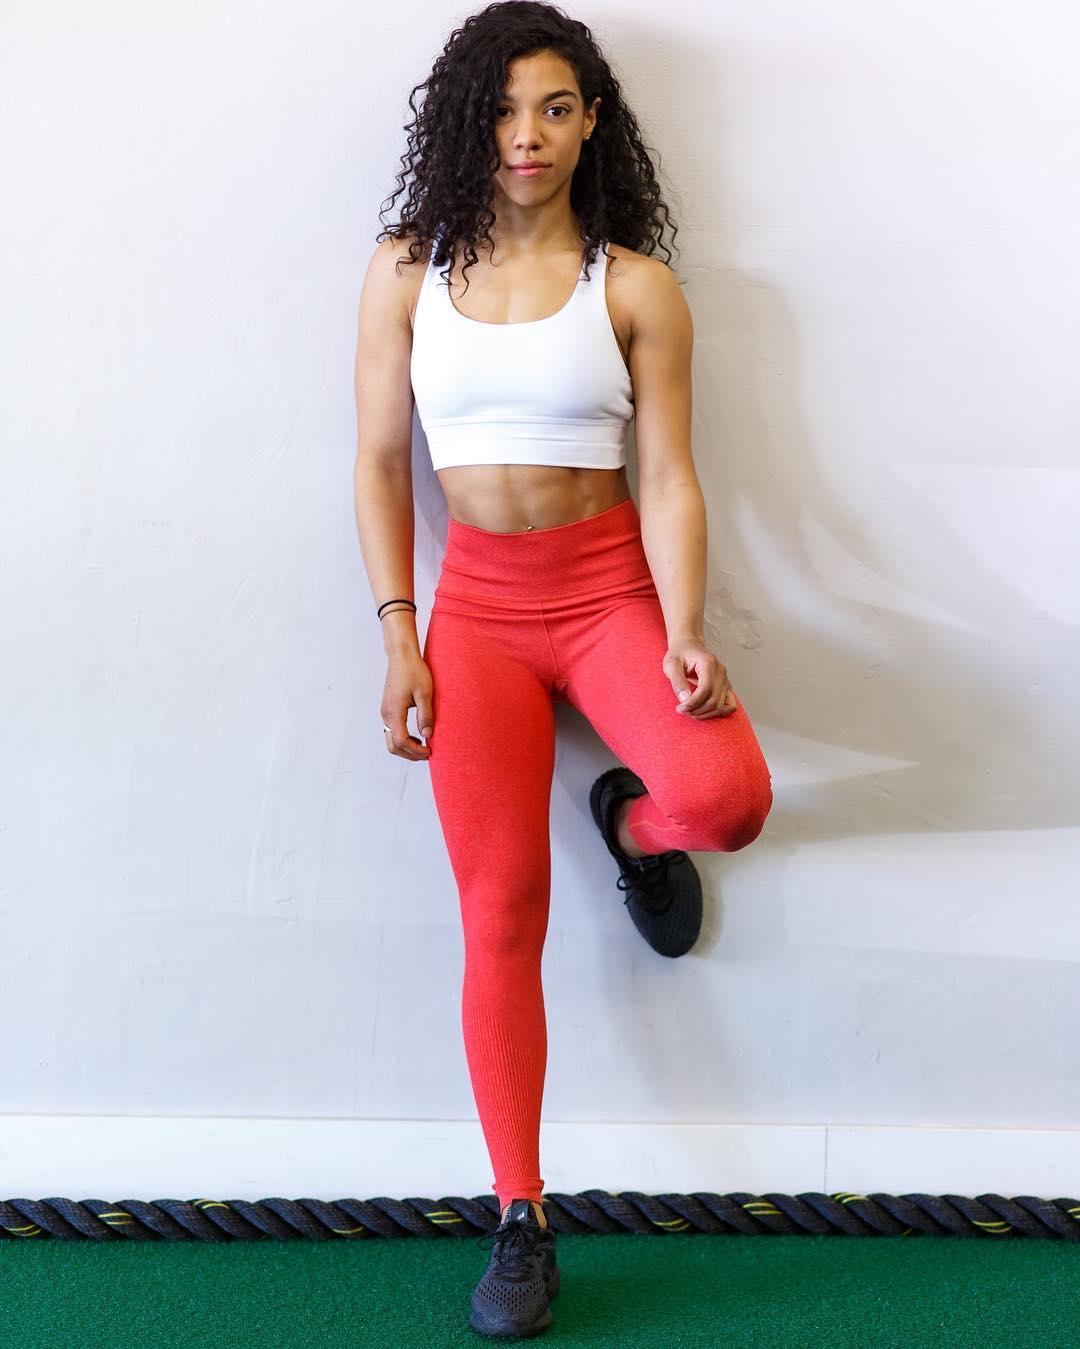 Queen's Reign Coral Leggings – The Omega Fitness